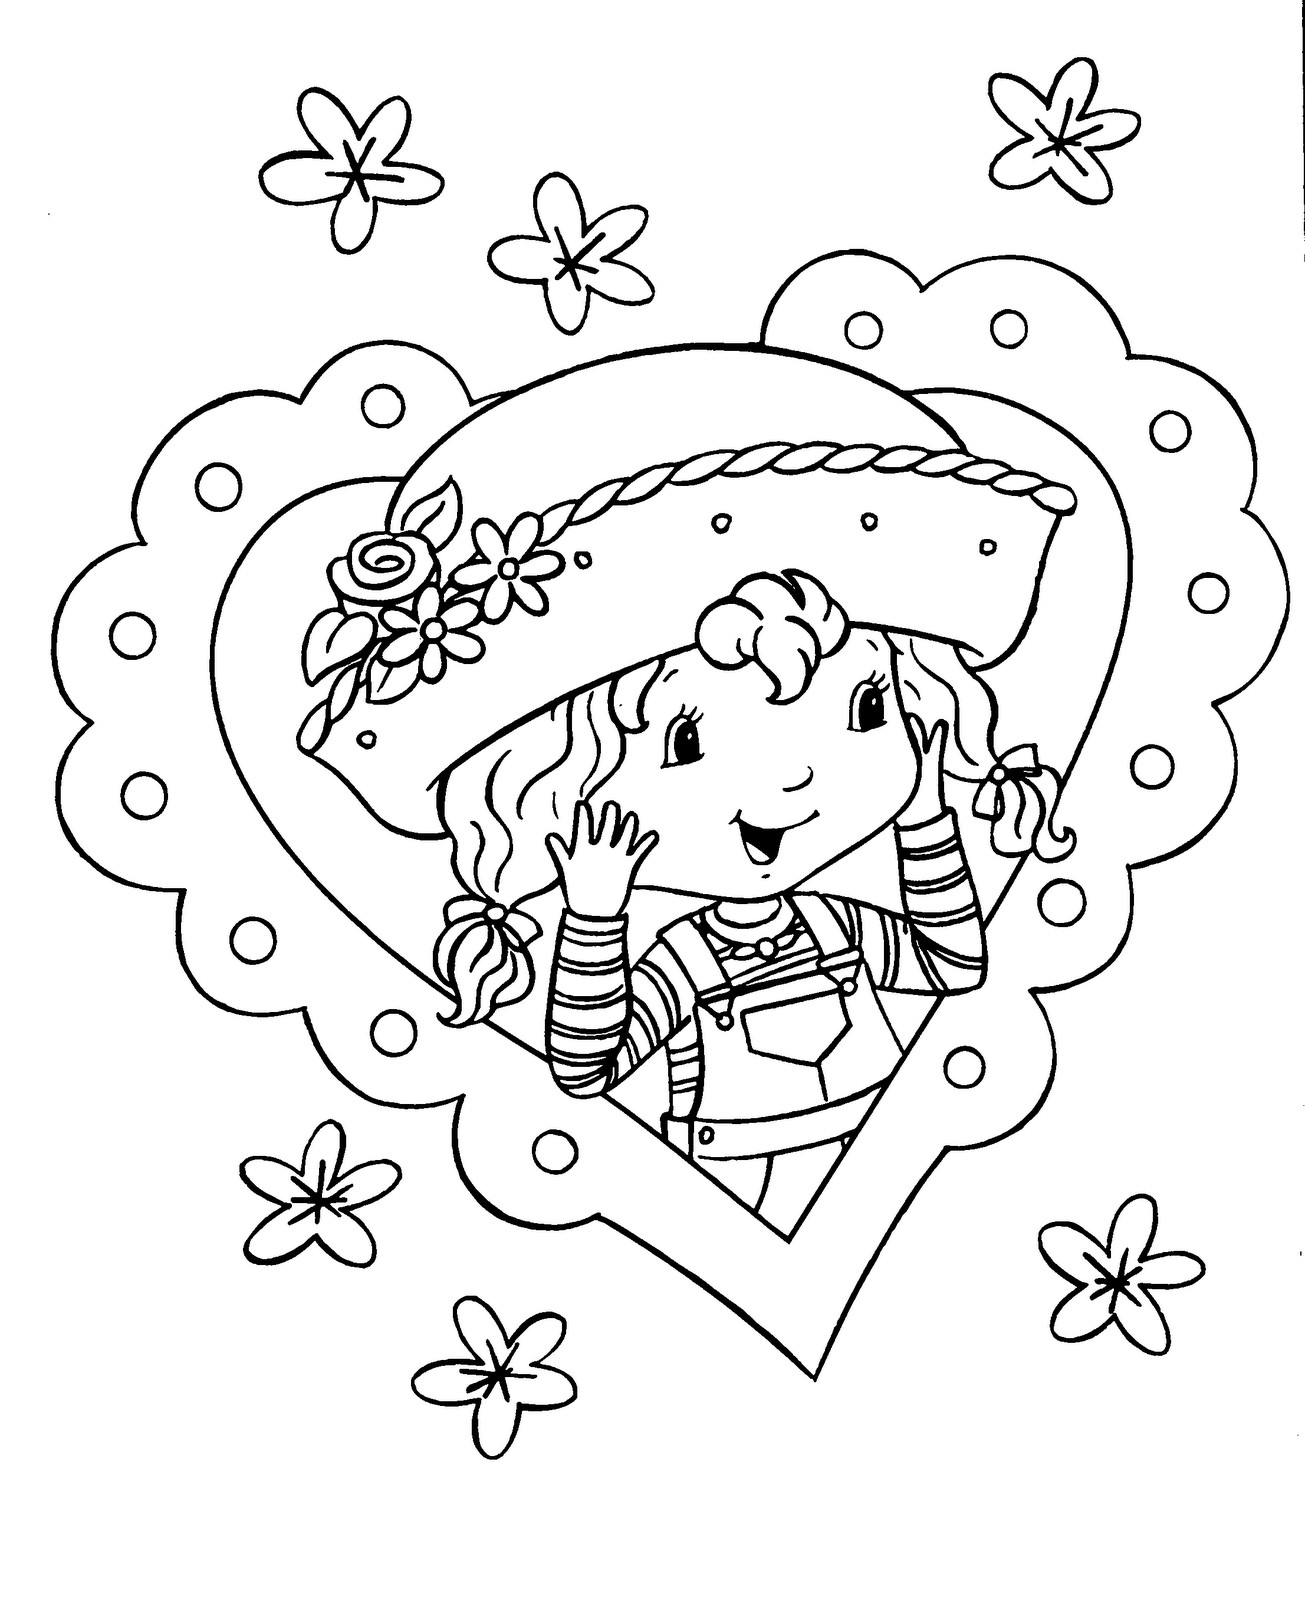 Strawberry Shortcake Printable Coloring Pages
 Coloring Pages For Girls Strawberry Shortcake Coloring Pages